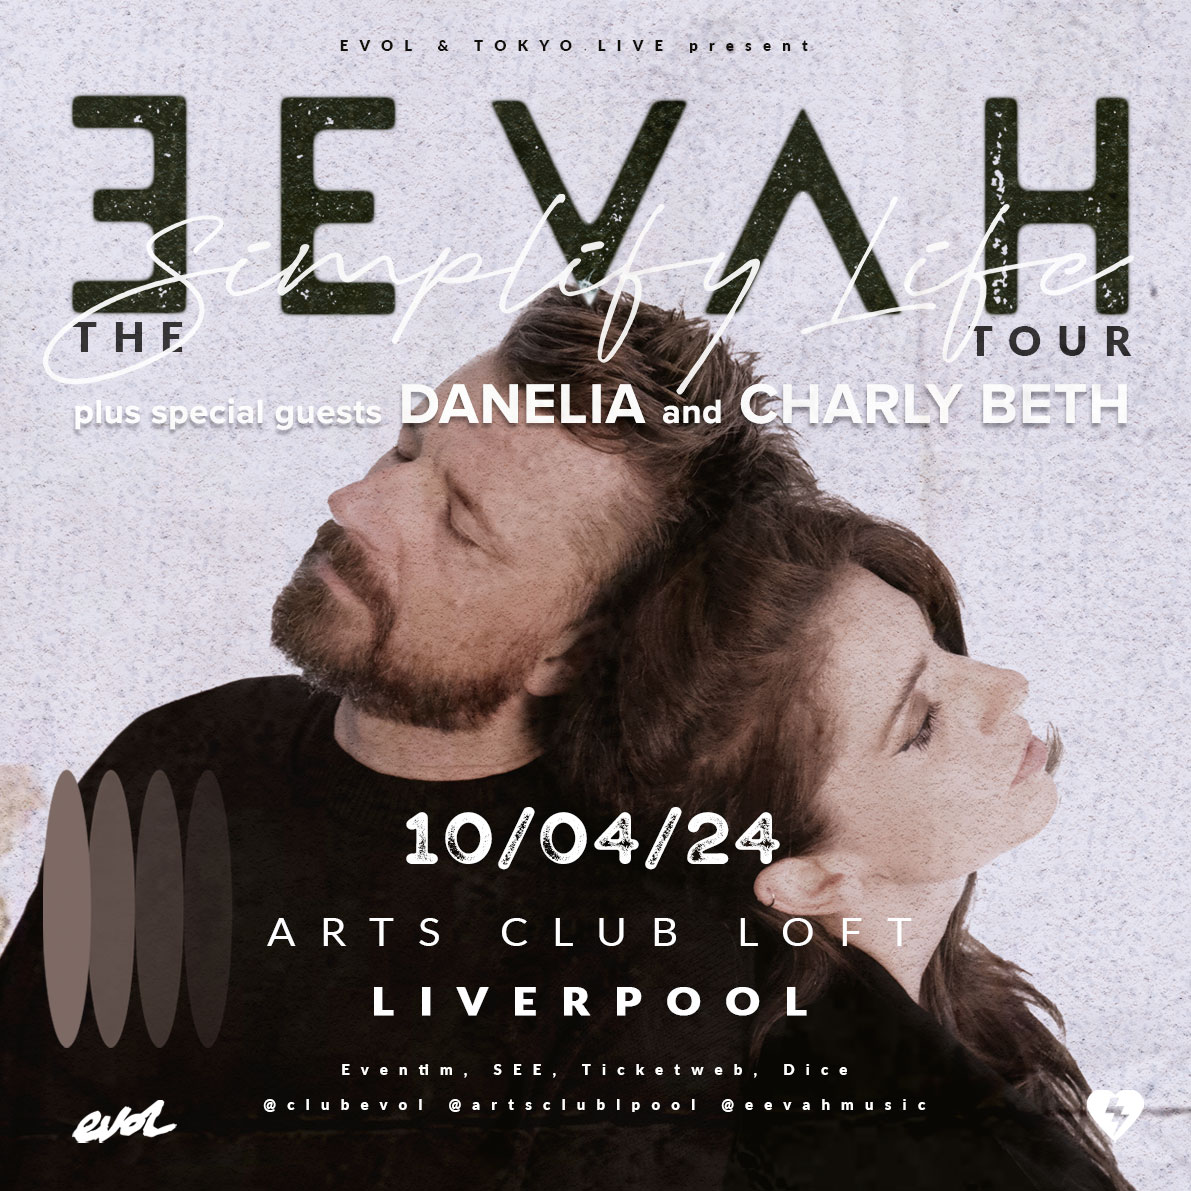 𝐓𝐎𝐌𝐎𝐑𝐑𝐎𝐖 @eevahmusic - made up of @embrace guitarist @RichardMcNamara and vocalist Nicole Hope Smith - kick off their UK tour here in Liverpool at @artsclublpool joined by special guests @itsmedanelia and Charly Beth. Get your tickets NOW: seetickets.com/event/eevah/ar…